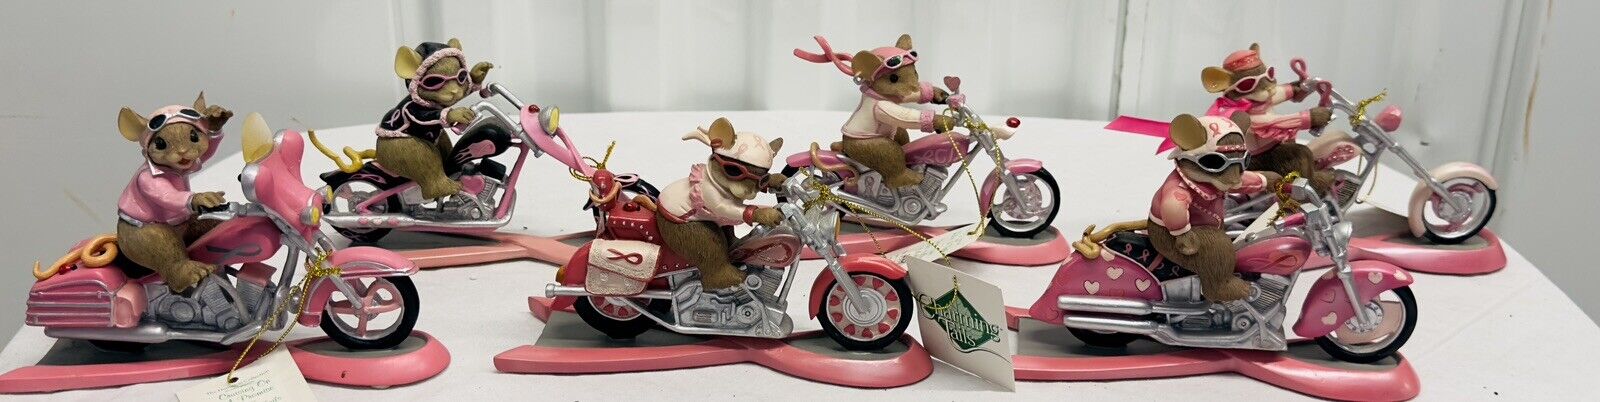 The Hamilton Collection Trails Of A Cure Breast Cancer Motorcycle Mice Set Of 6